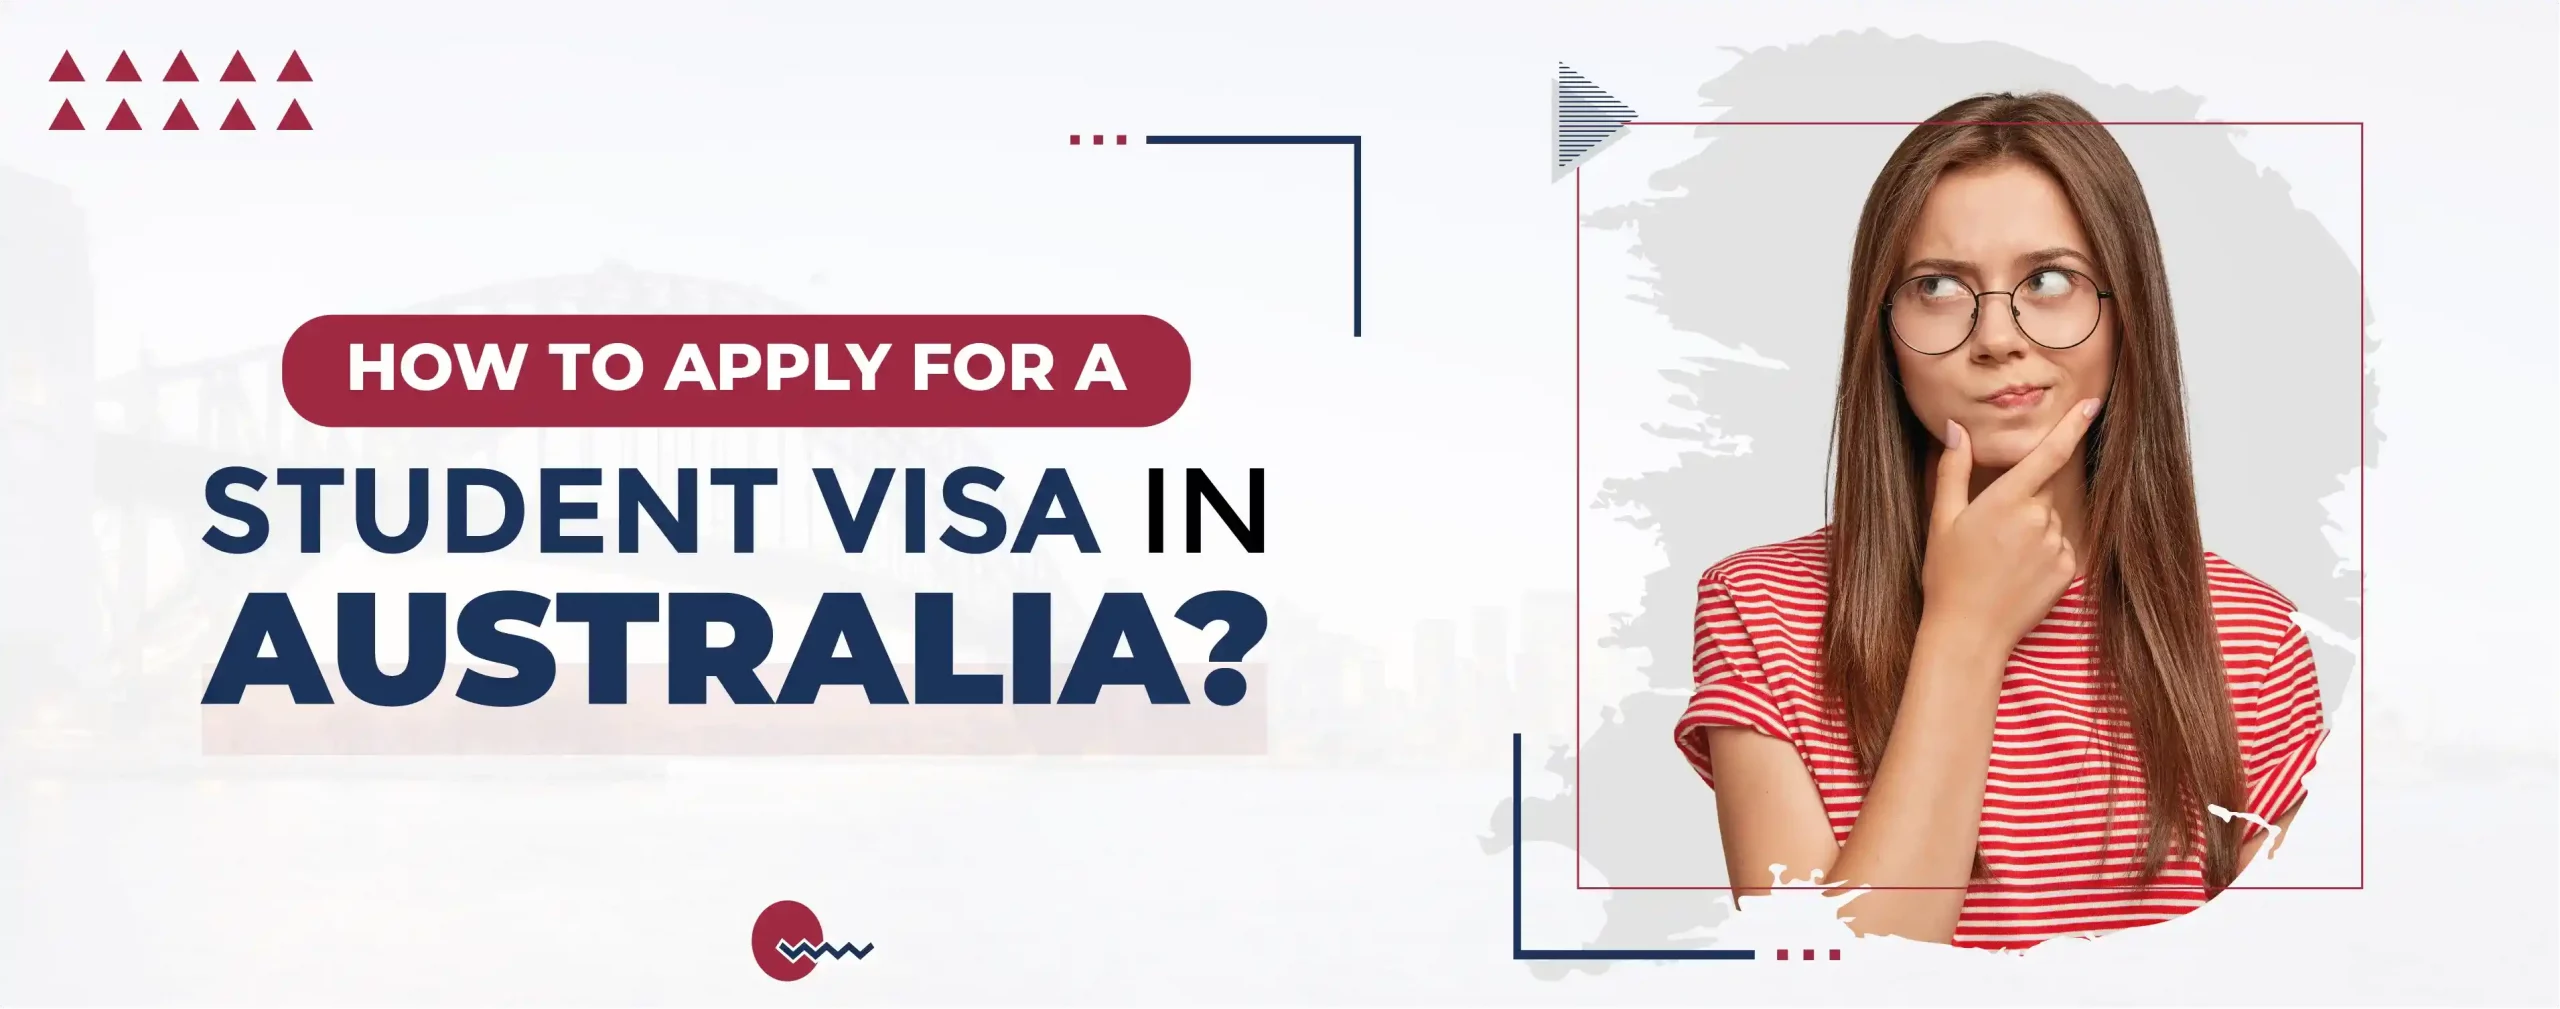 How to Apply for a Student Visa in Australia?